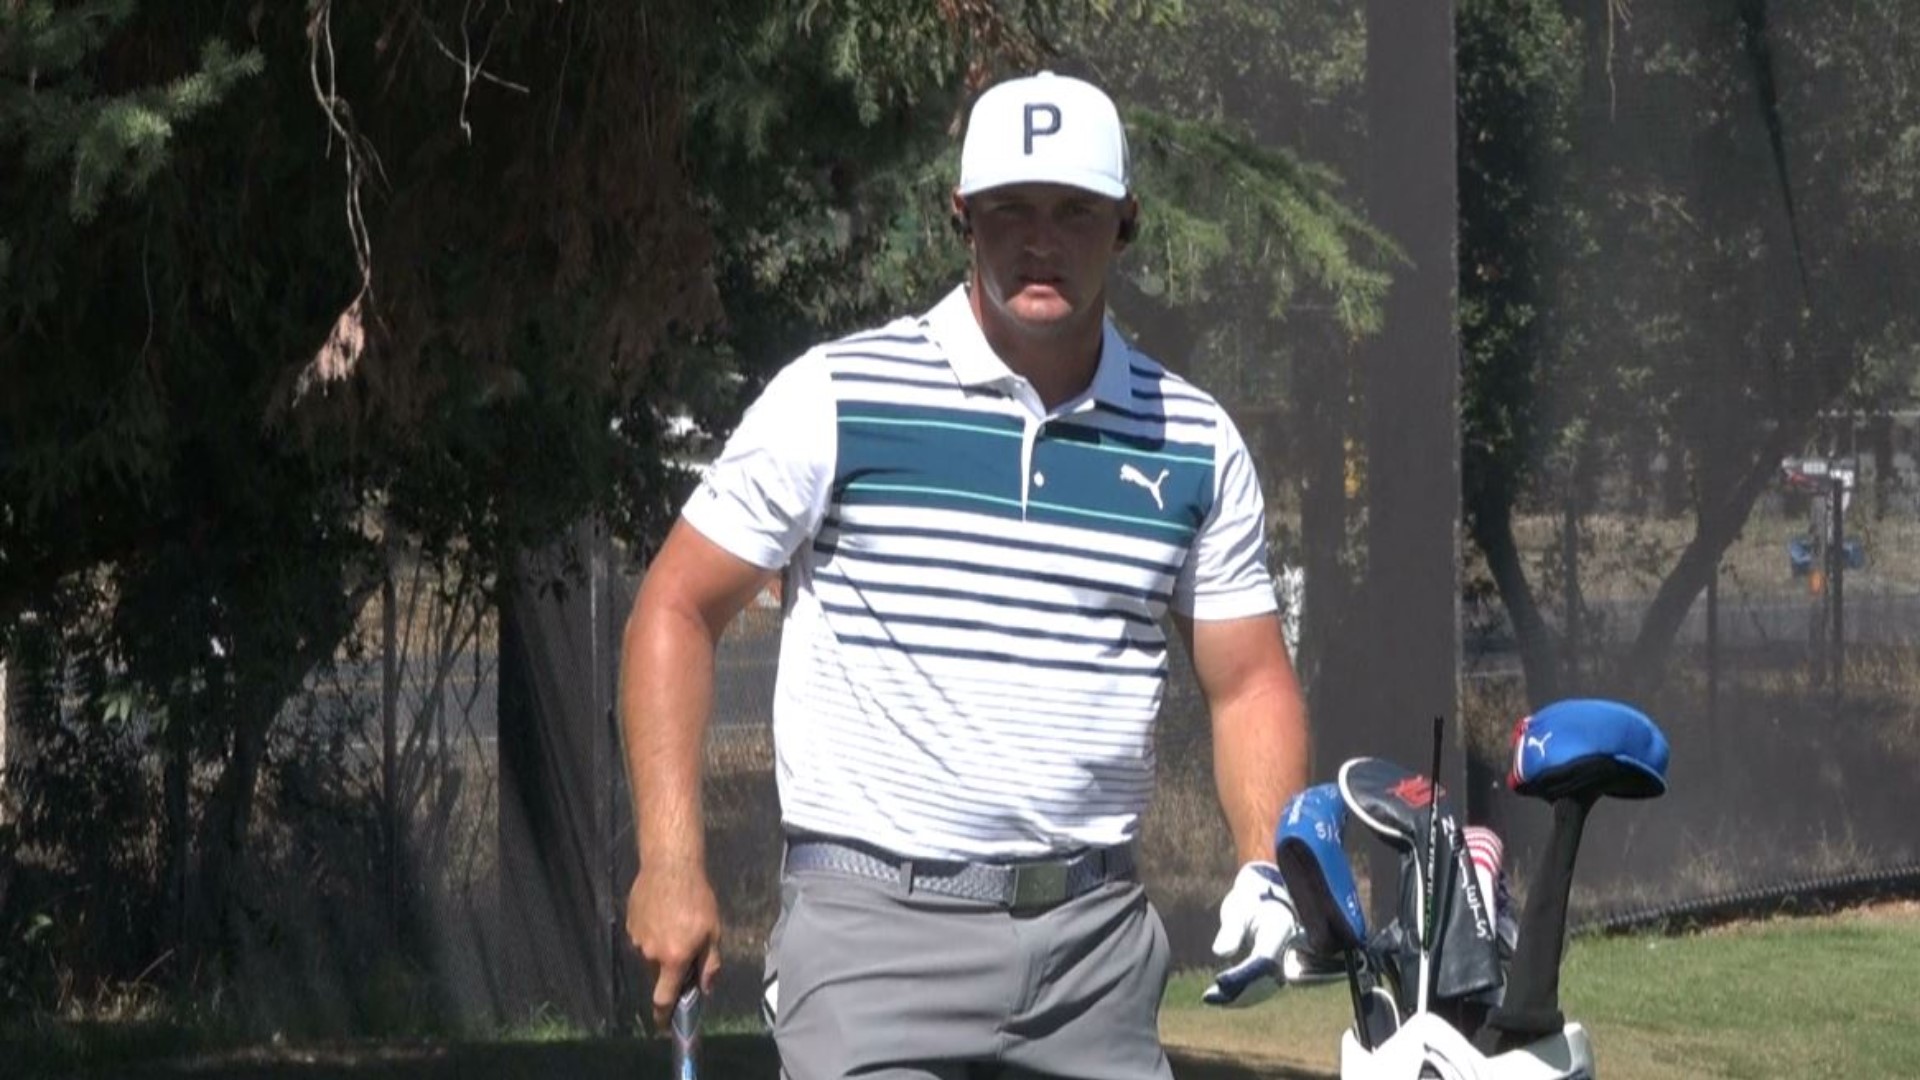 Modesto native and PGA Tour Star Bryson DeChambeau makes his return to Northern California, where he'll be competing this week at the Safeway Open in Napa.